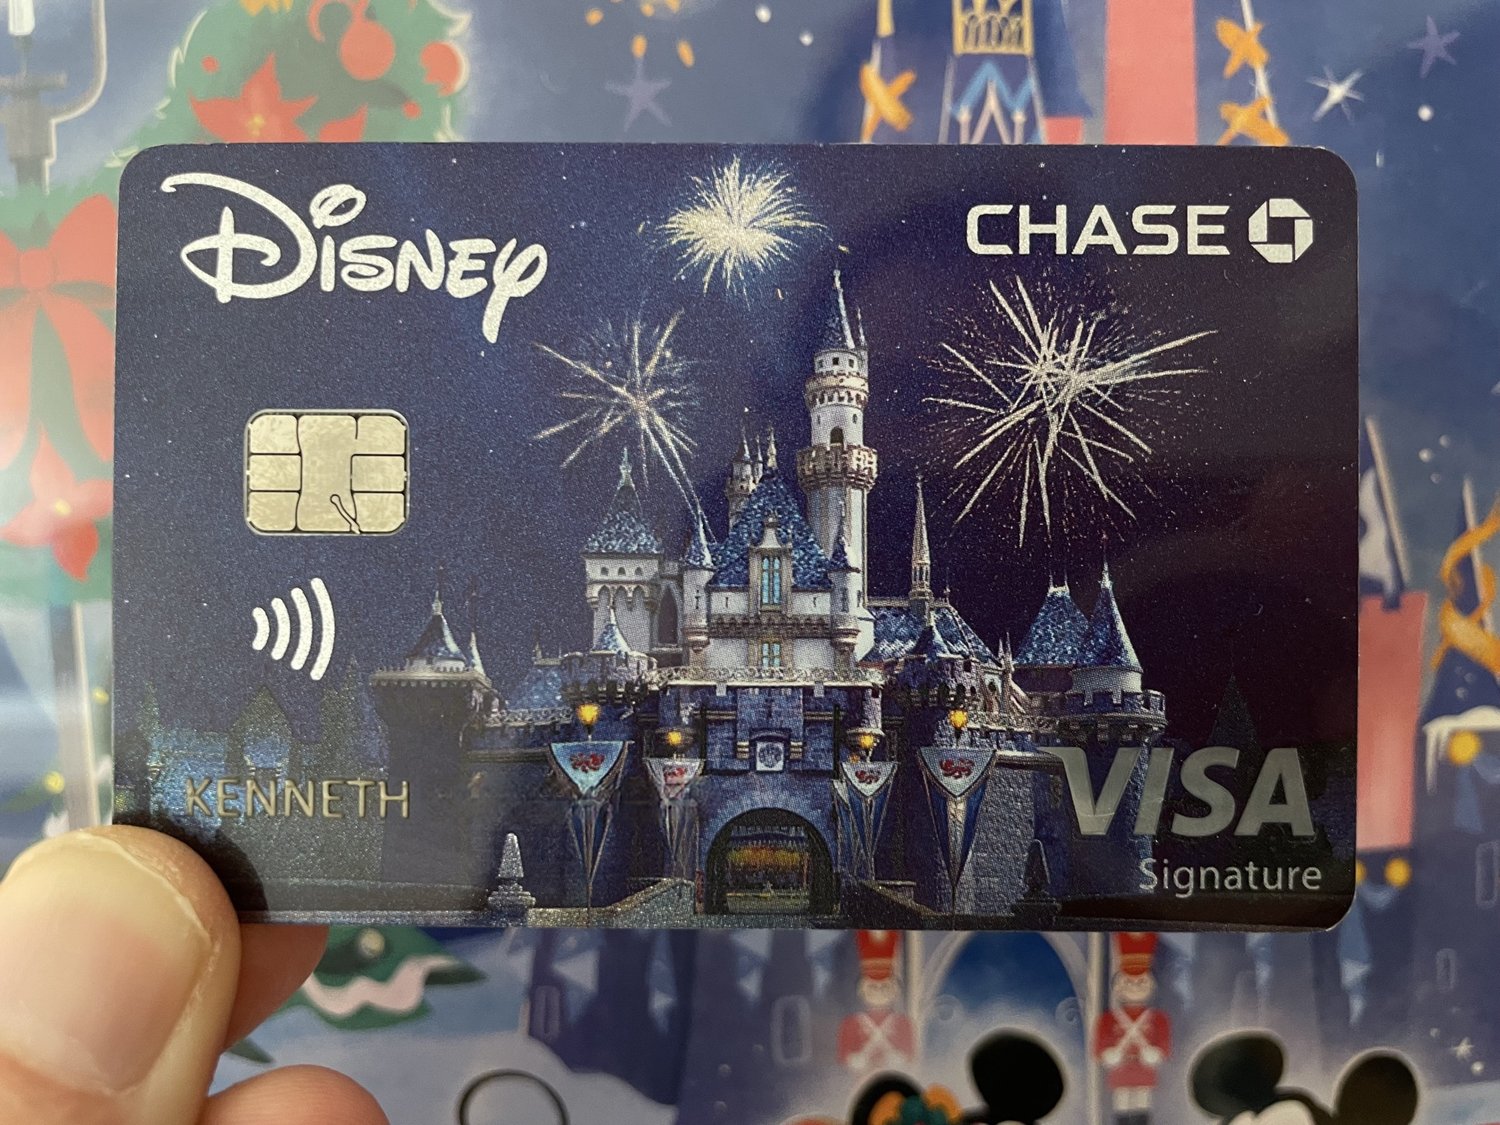 Disney Chase Visa Credit Card Review (2020 Edition) - Mouse ...